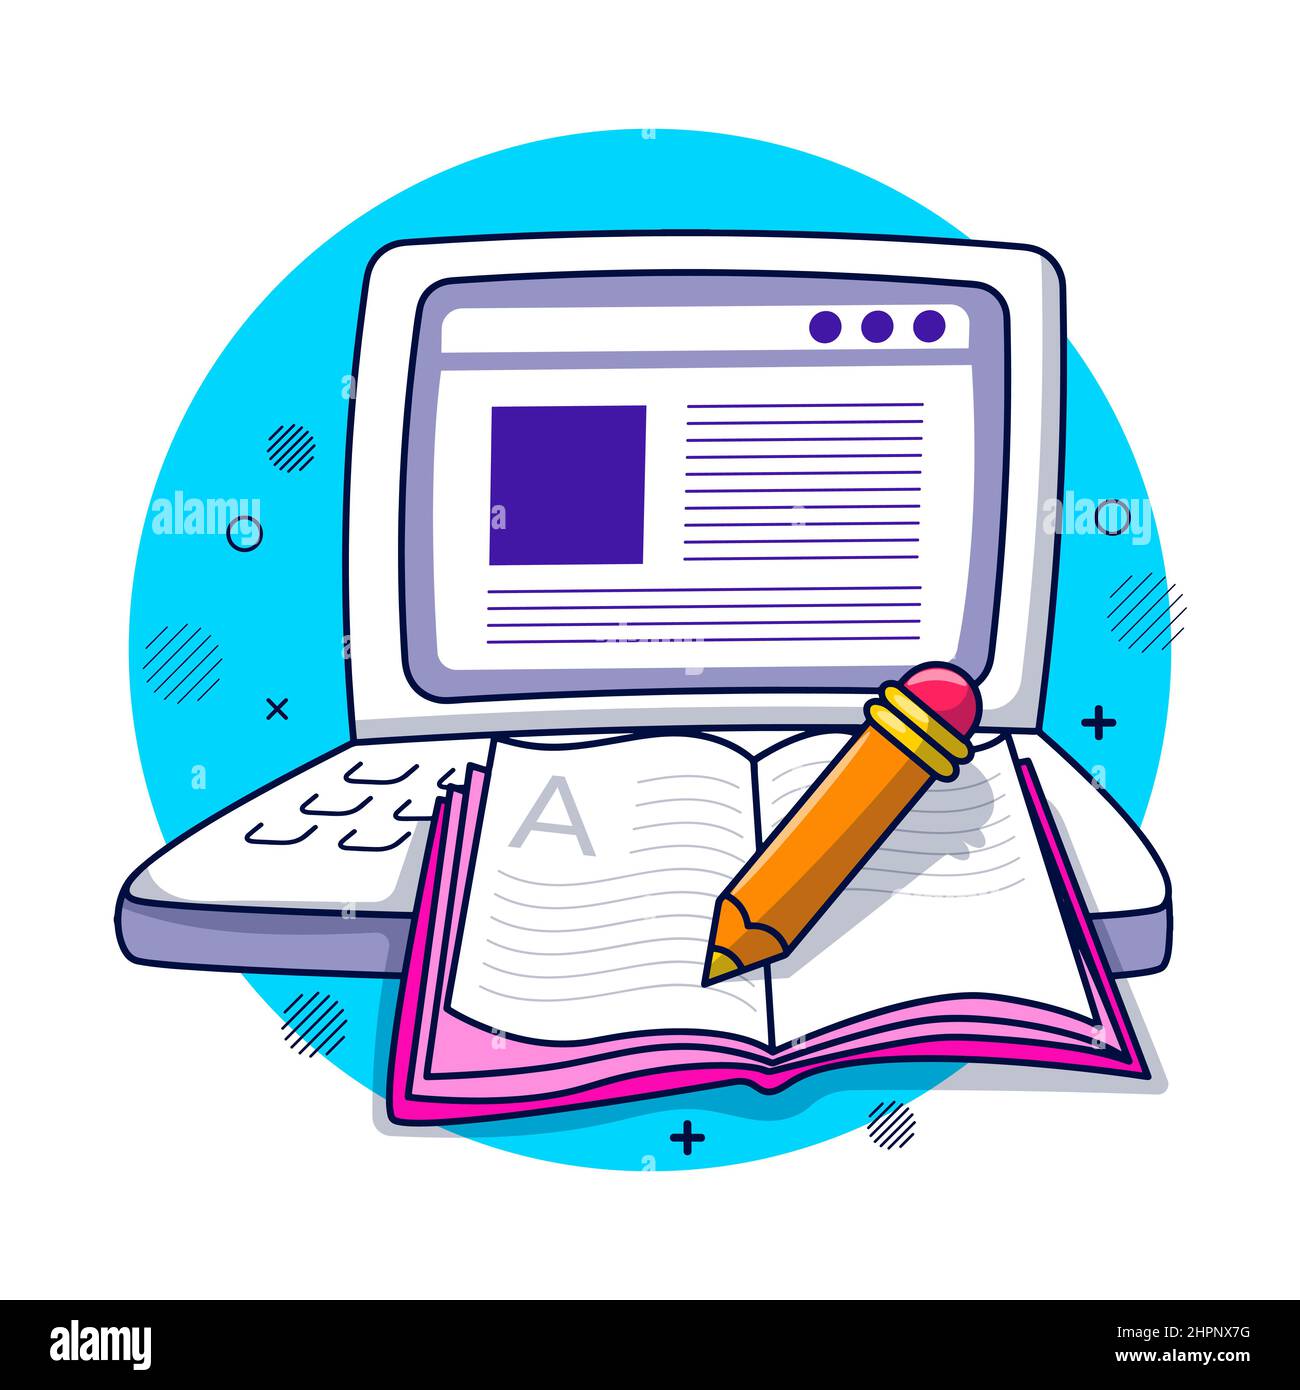 Laptop with pencil and book, educational hand drawn cartoon illustration Stock Vector